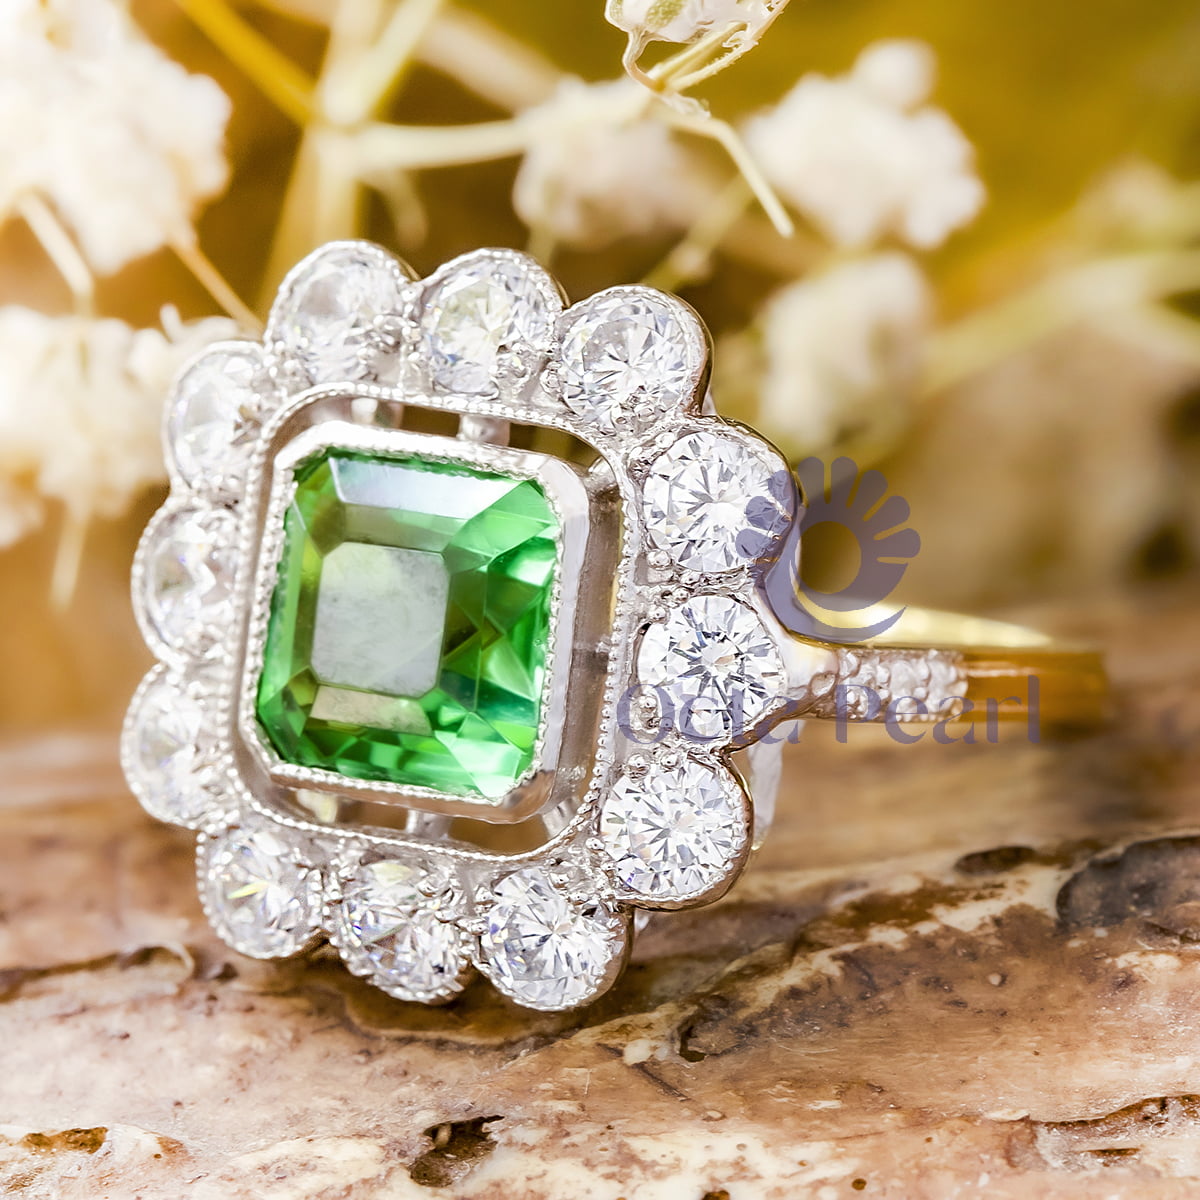 Vintage-Inspired Green Floral Halo Ring